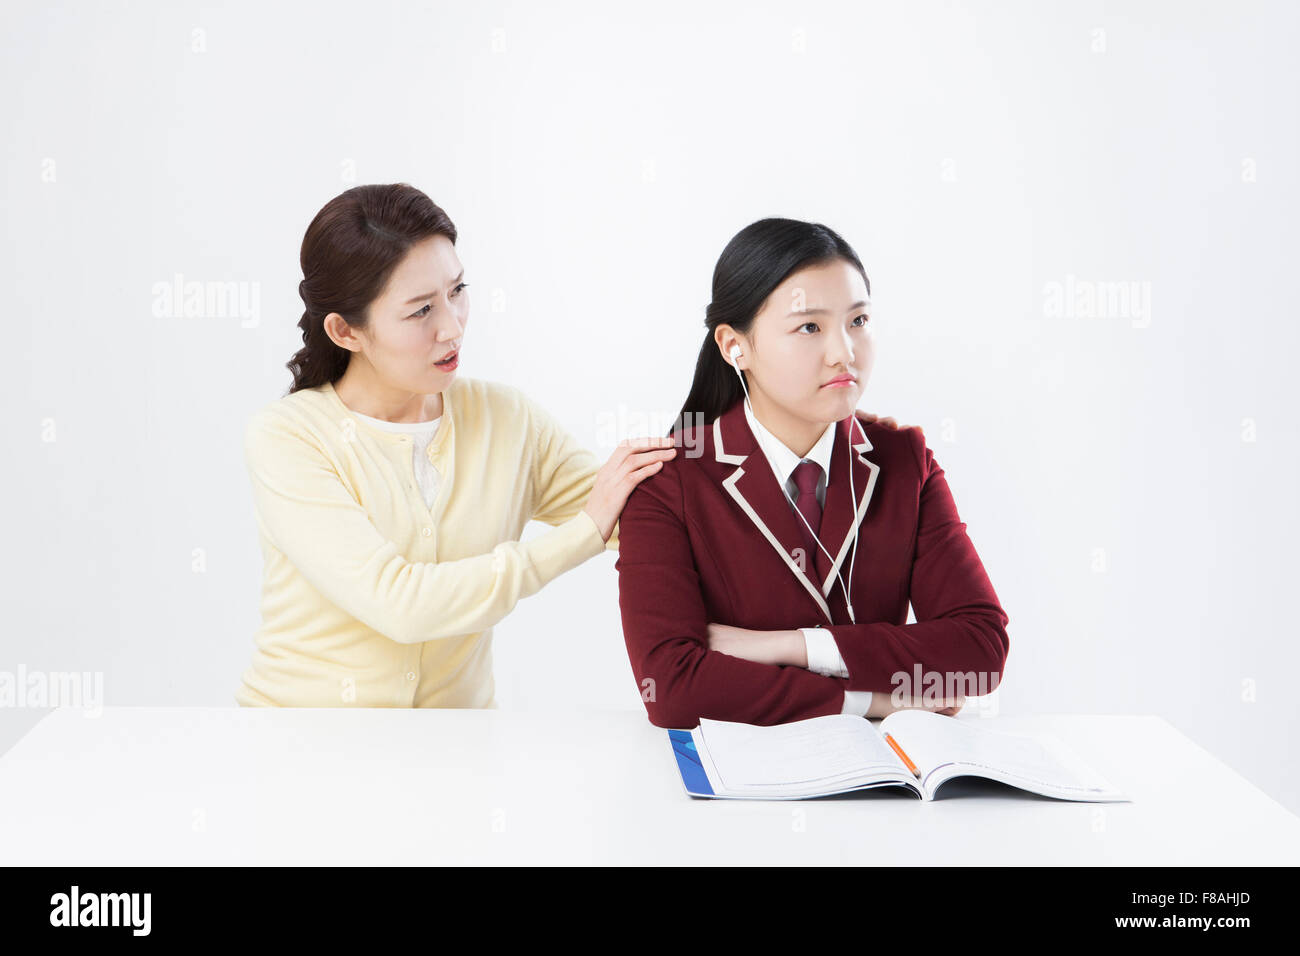 Mother in dissatisfaction touching her daughter's shoulder and daughter listening to music at desk with an open book Stock Photo